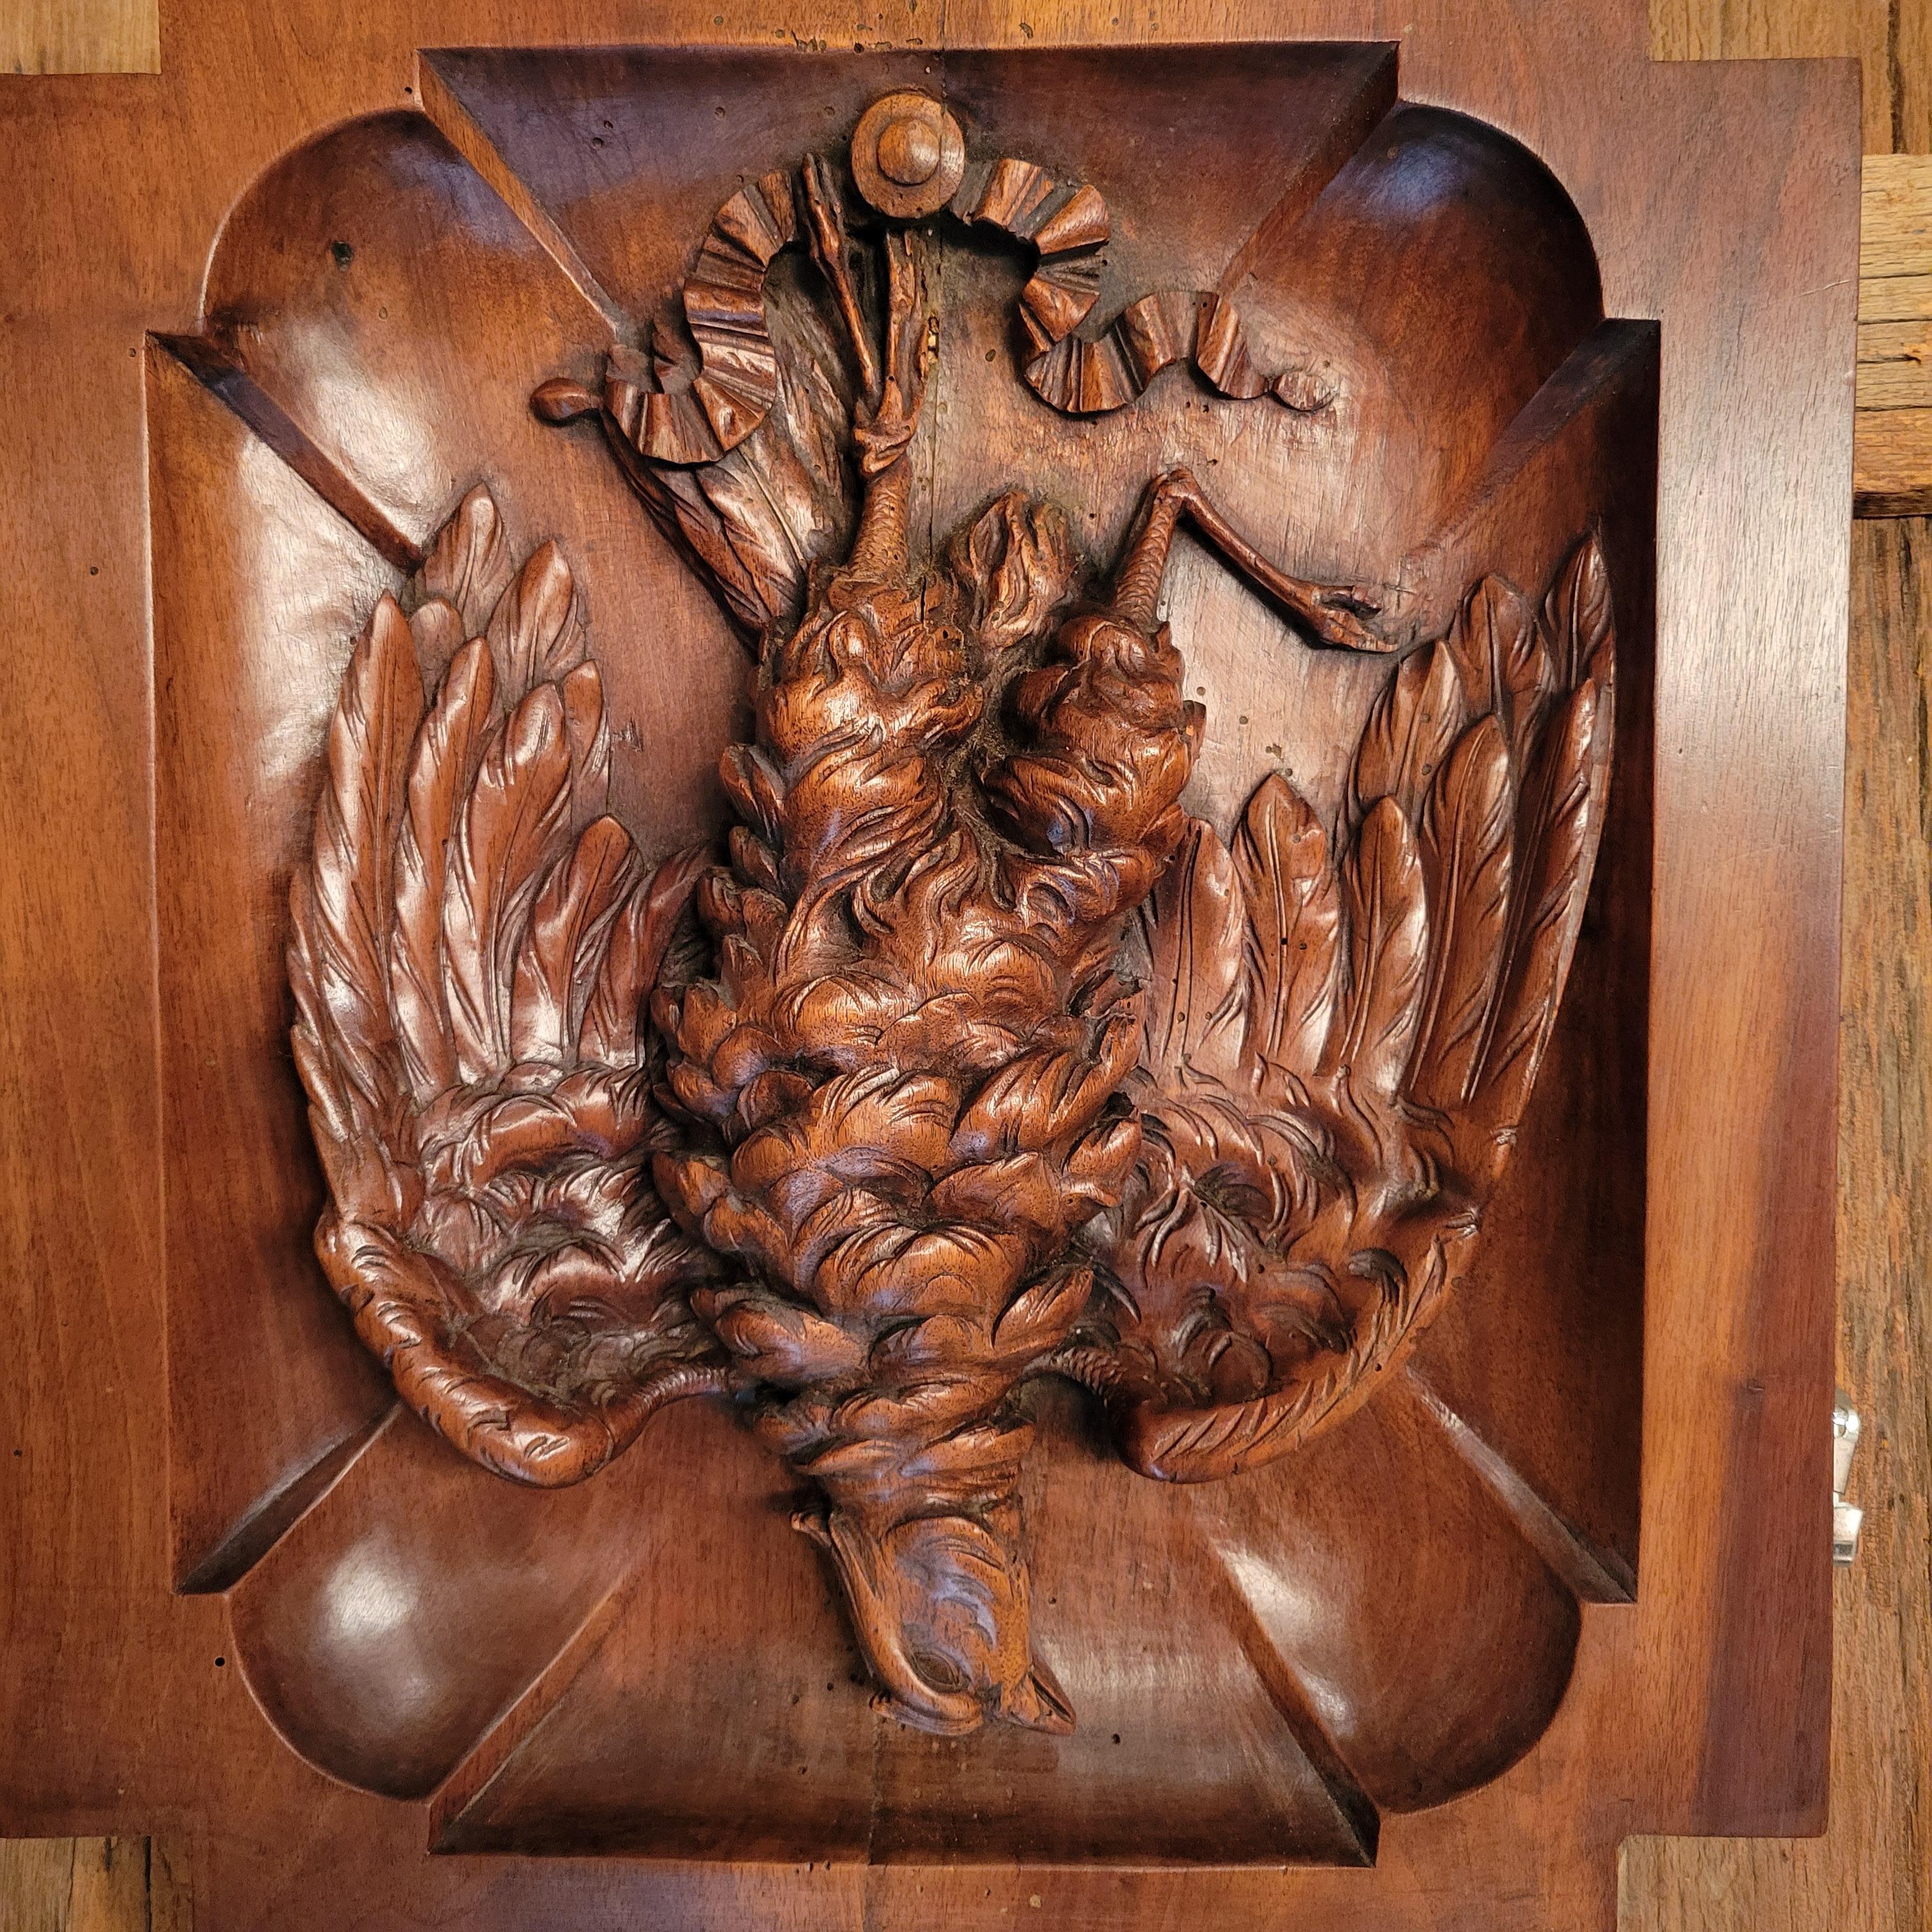 These handsome wall plaques are very well executed. There is great attention paid to detail in these birds.